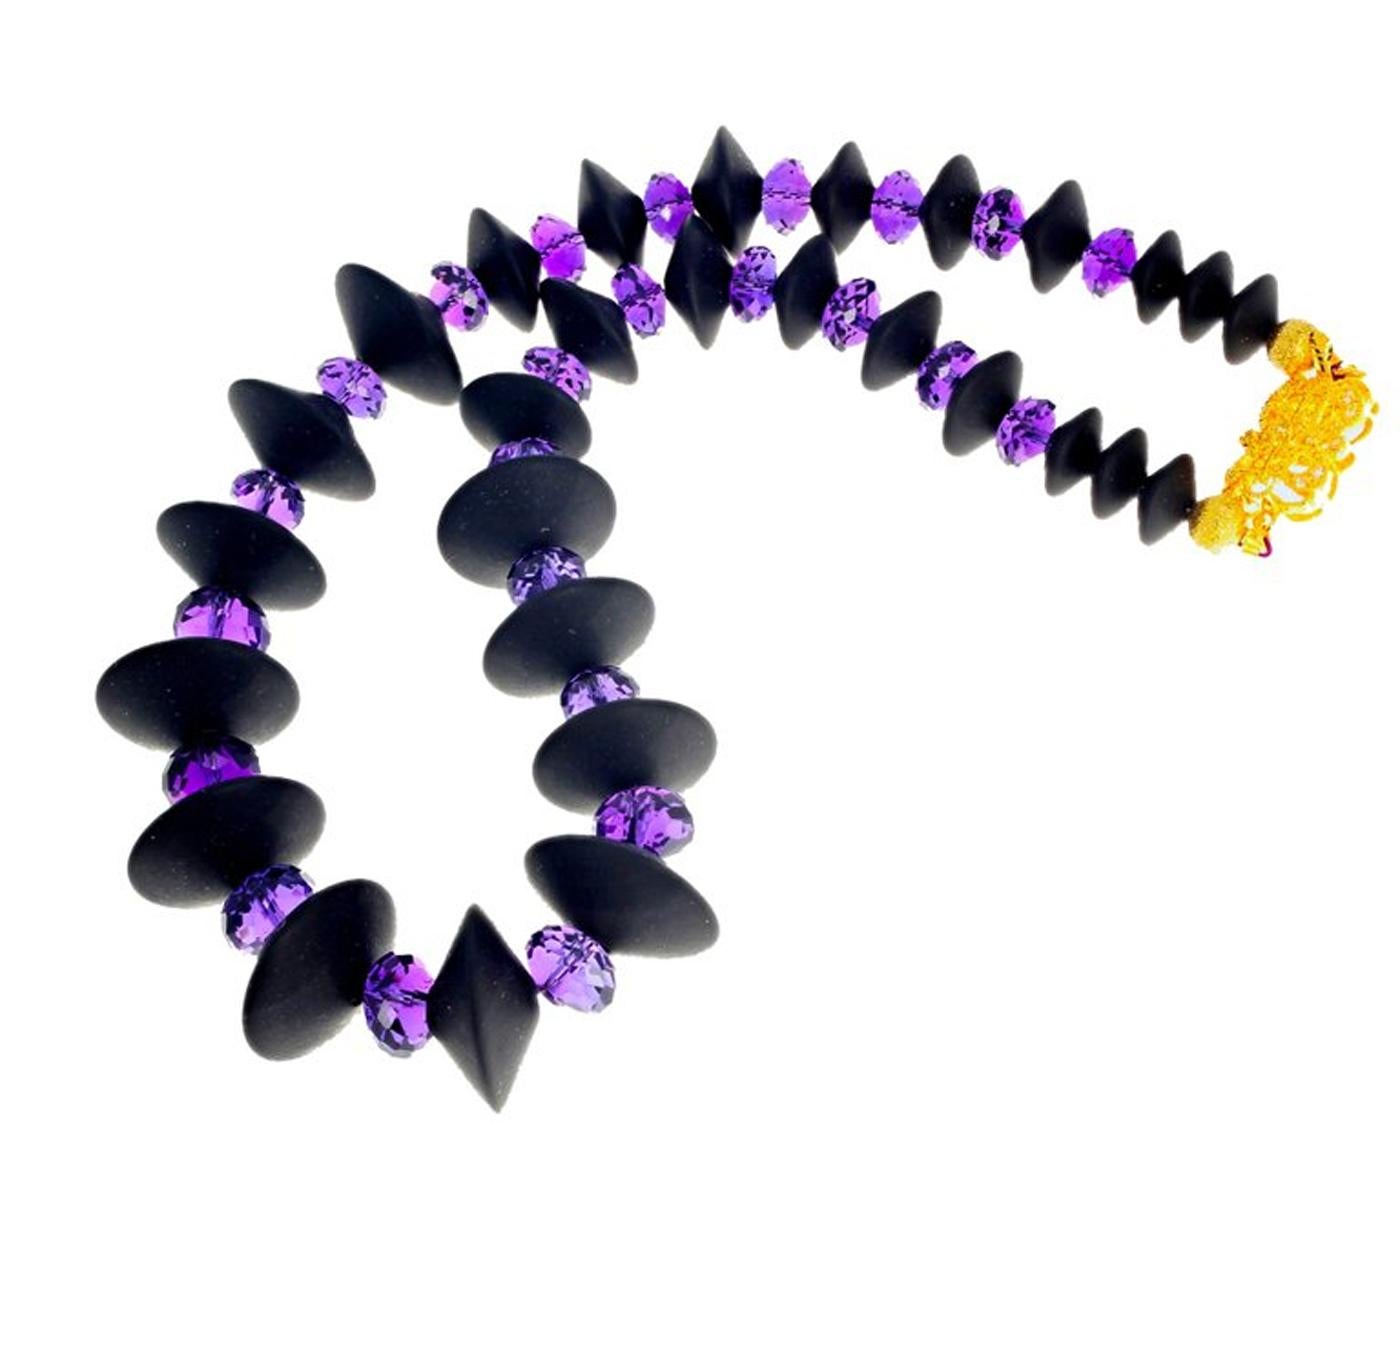 Large checkerboard gem cut glittering Amethyst rondel gemstones enhanced by these lovely round black Onyx gems in a 15 inch necklace with gold washed clasp. The largest Onyx are 20 mm.  This is magnificently sparkling and glamorous around your neck.